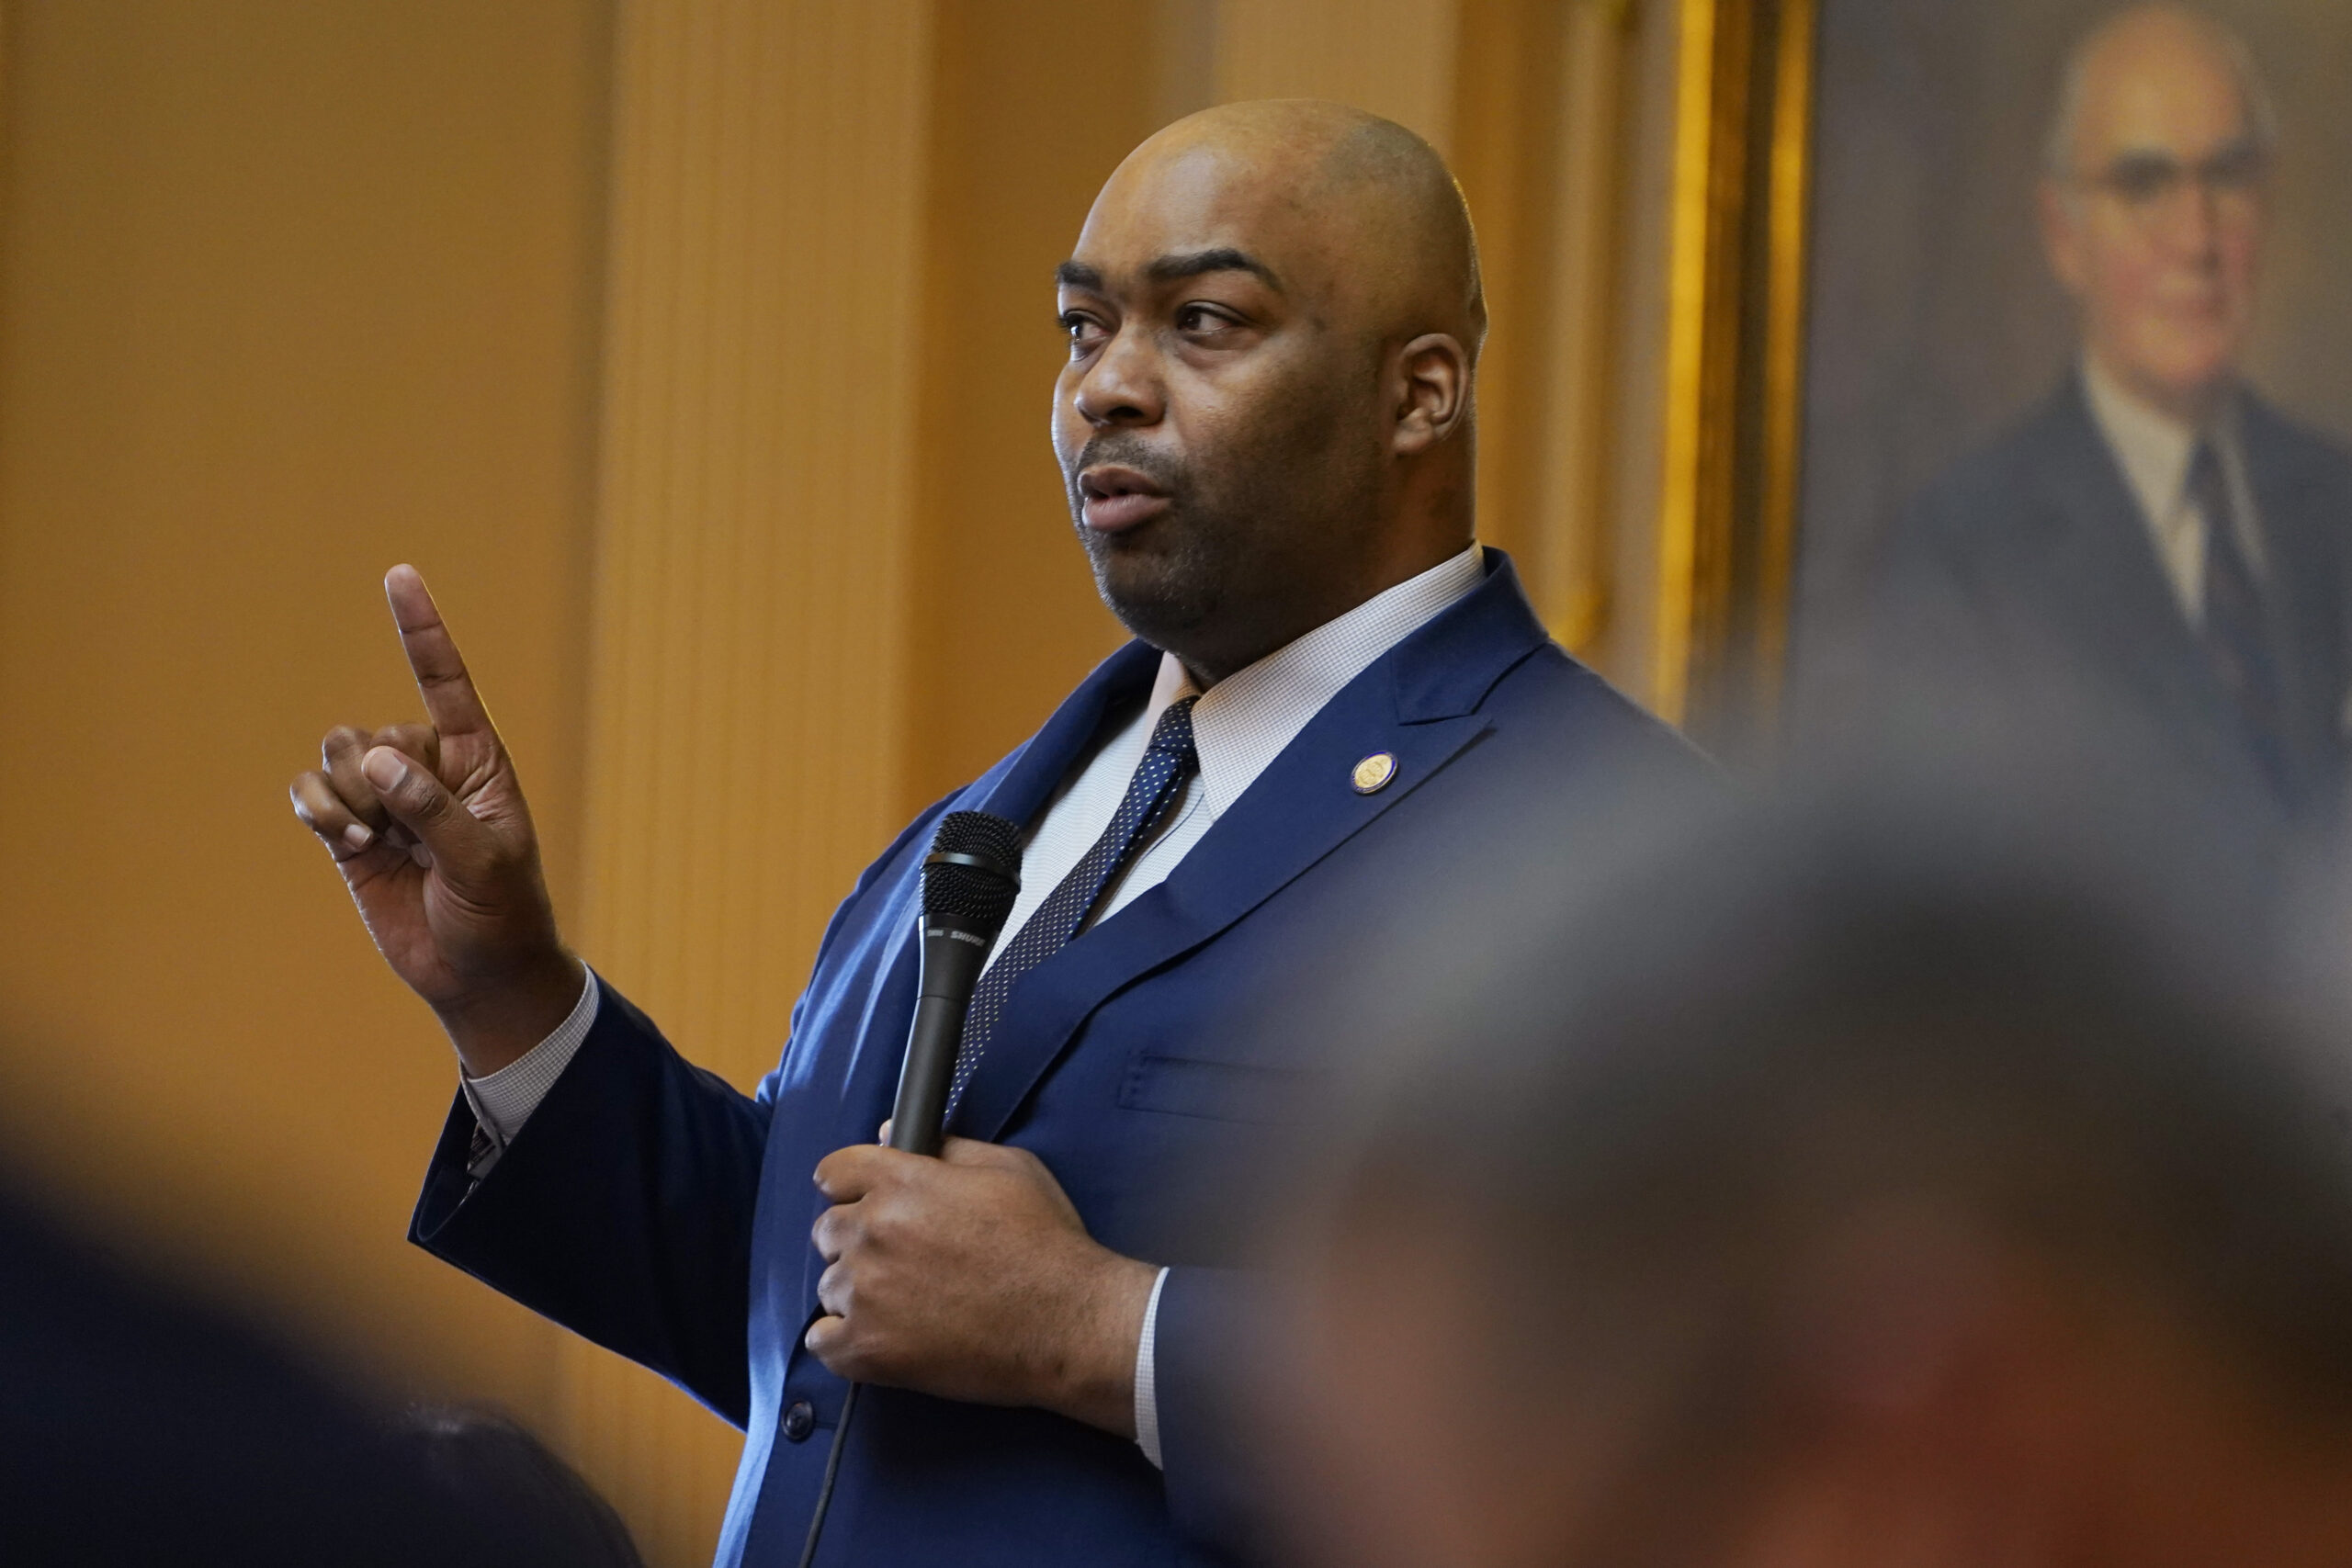 Lamont Bagby Wins Special Election to Replace Jennifer McClellan in Virginia Senate